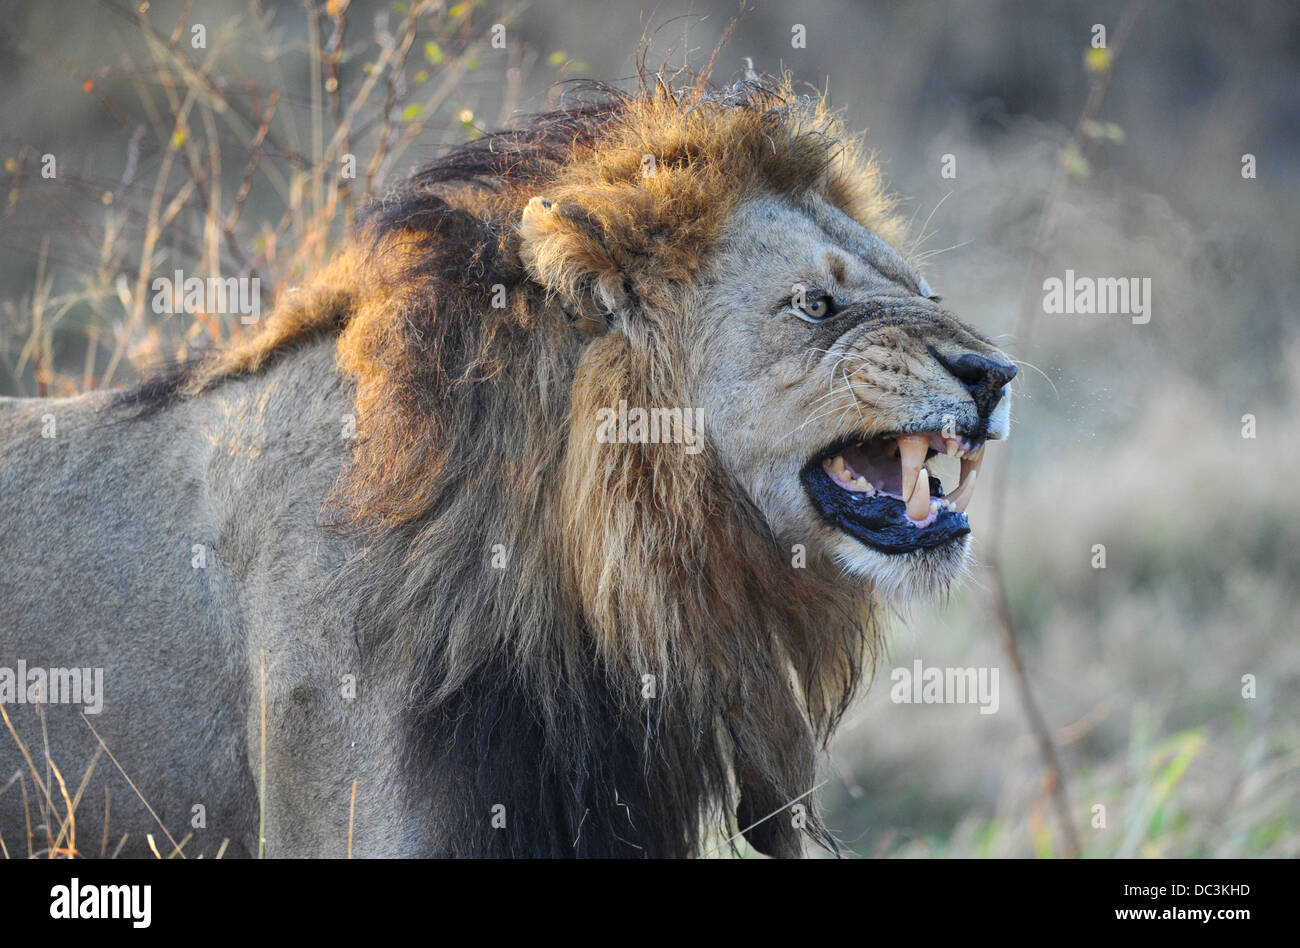 lion male yawling in early morning, portrait Stock Photo